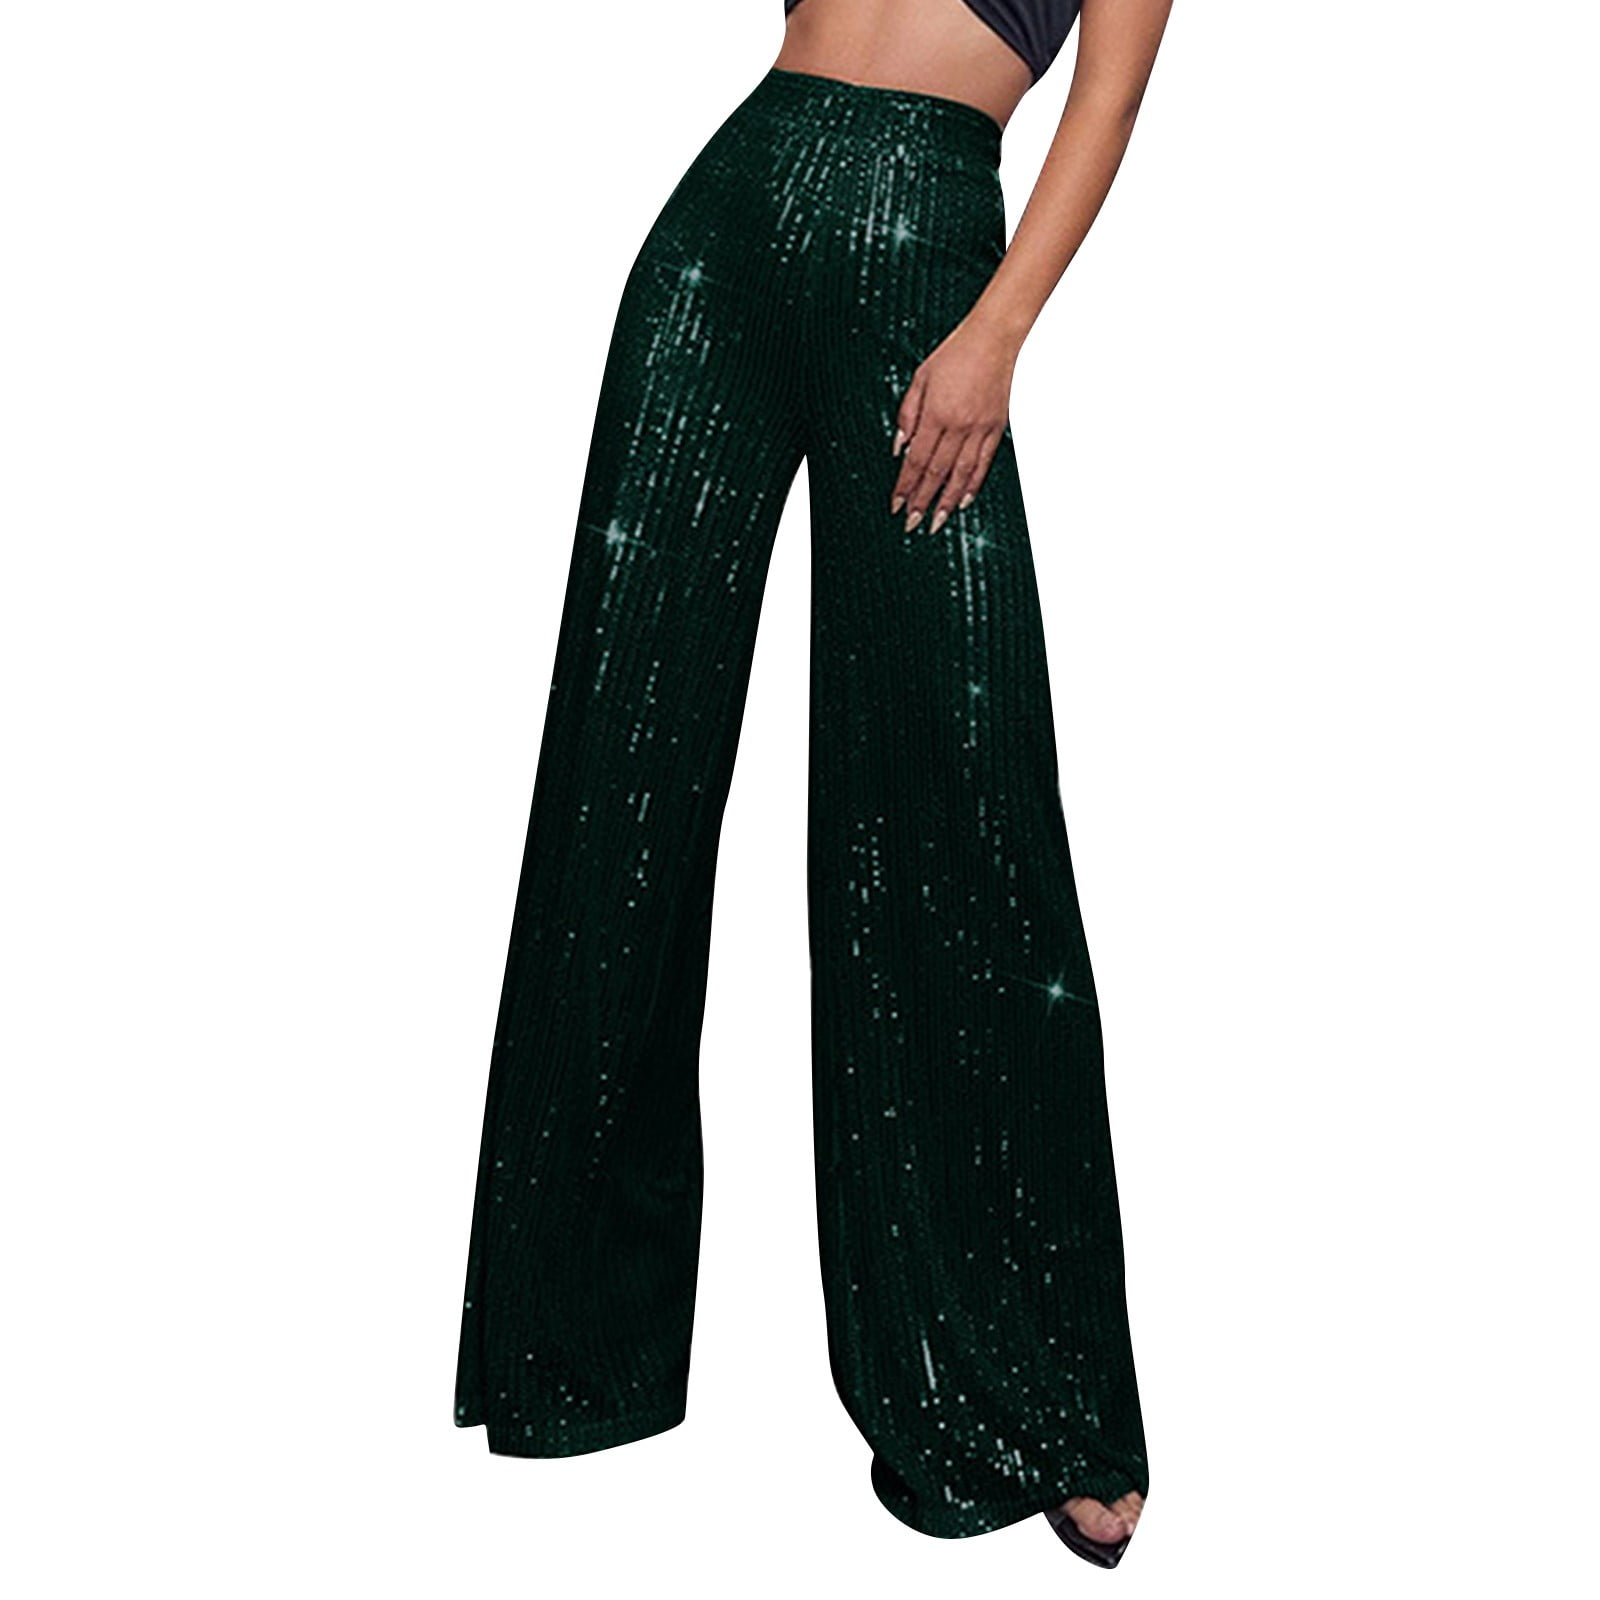 Dropship Plus Size Rhinestone Decor High Waist Skinny Pants; Women's Plus  Sexy Medium Stretch Solid Skinny Pants to Sell Online at a Lower Price